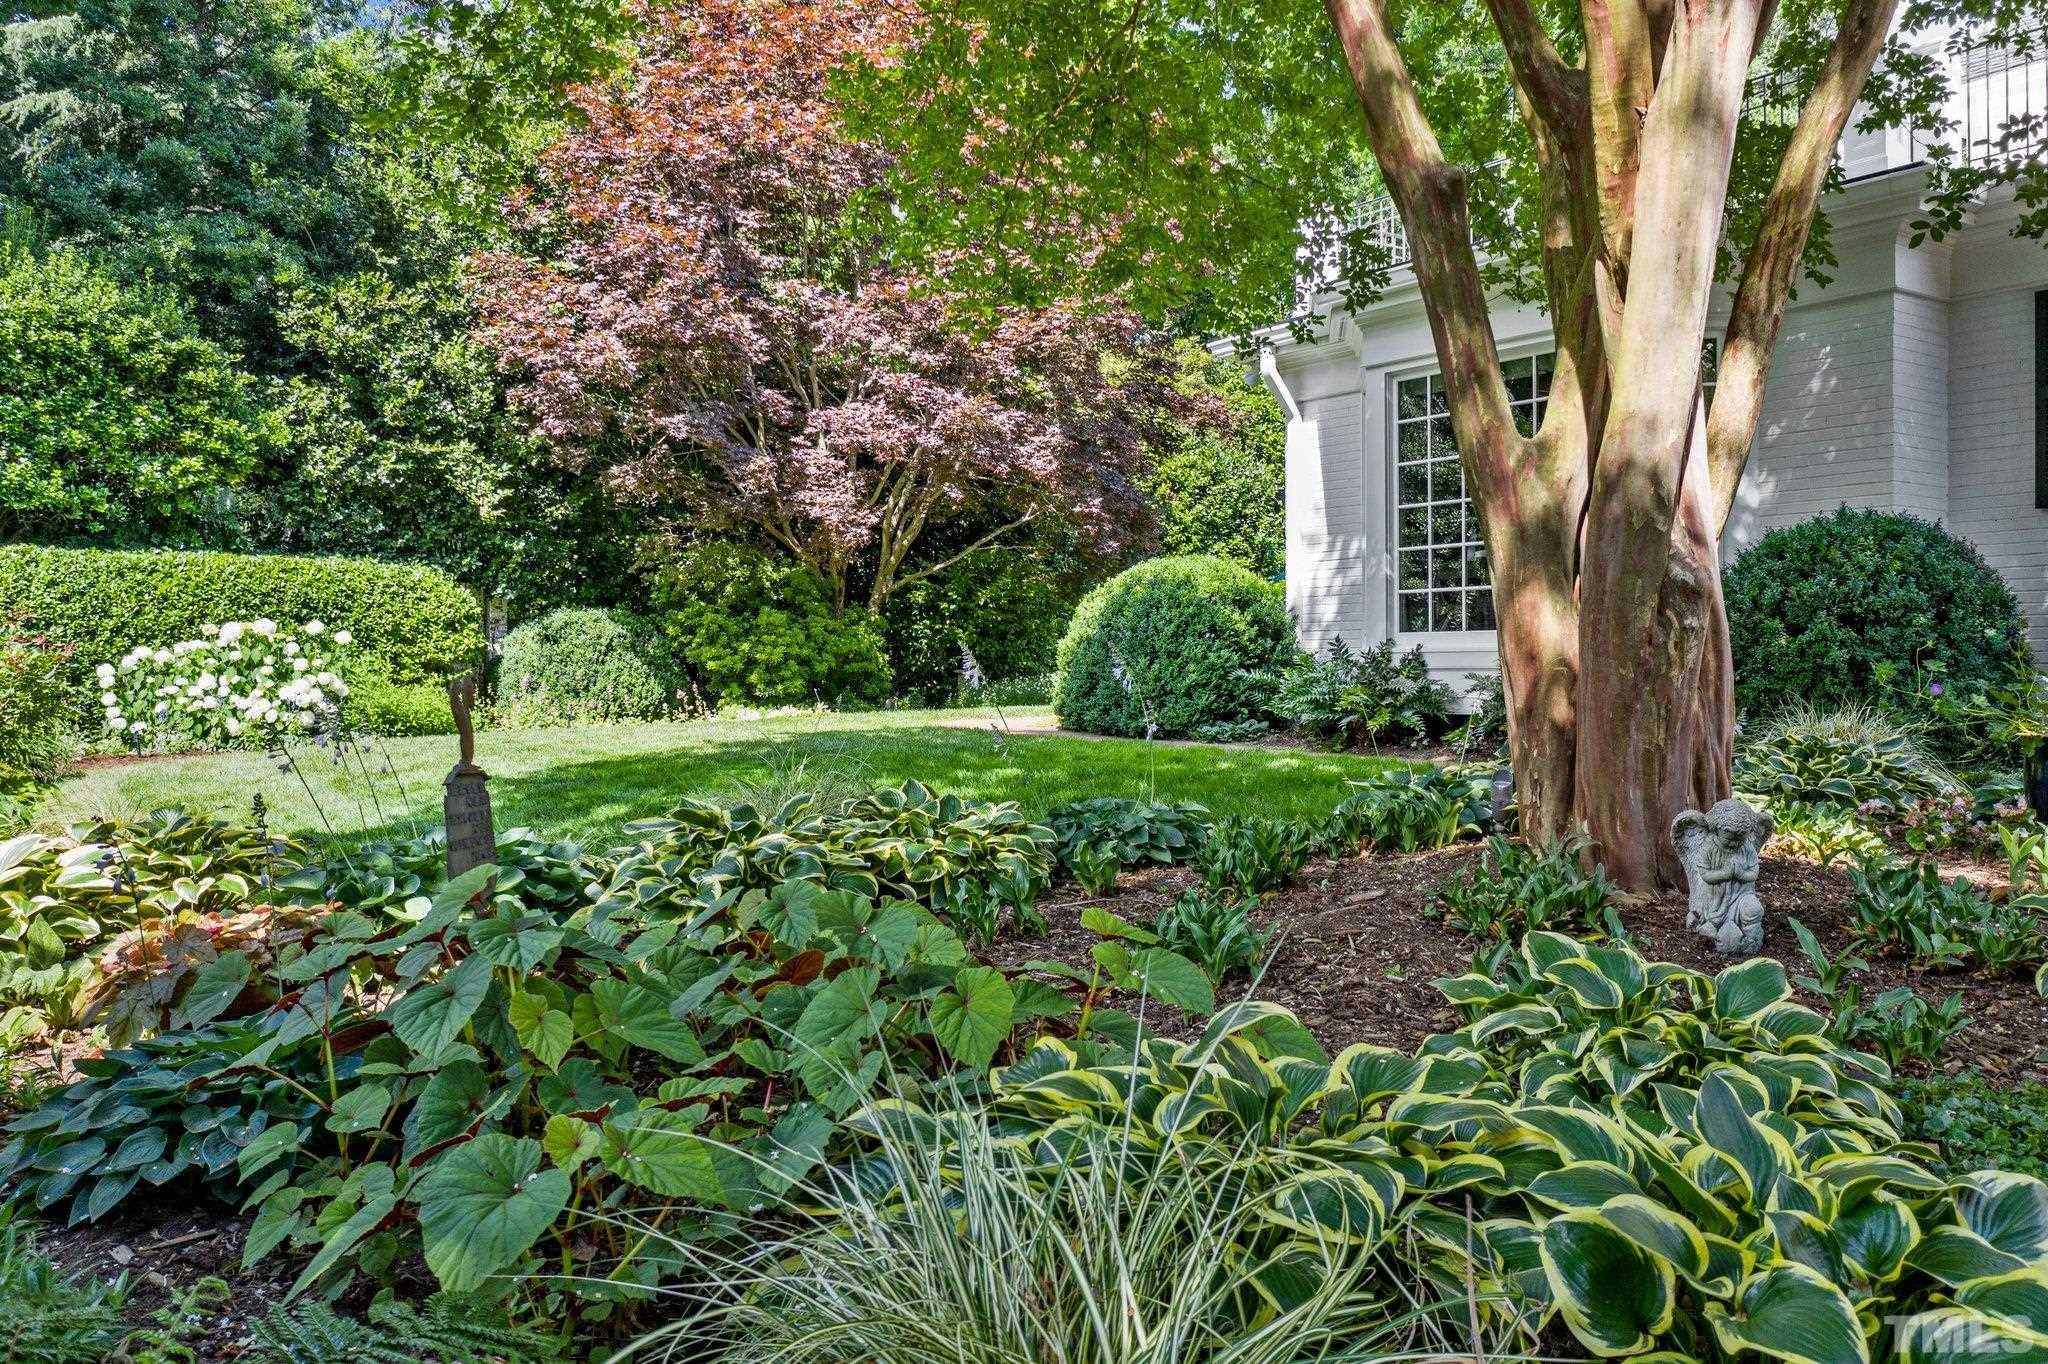 The center garden in the backyard is one of the most breath taking views. A lot of love and care has gone into the upkeep of this home and its exterior treasures.